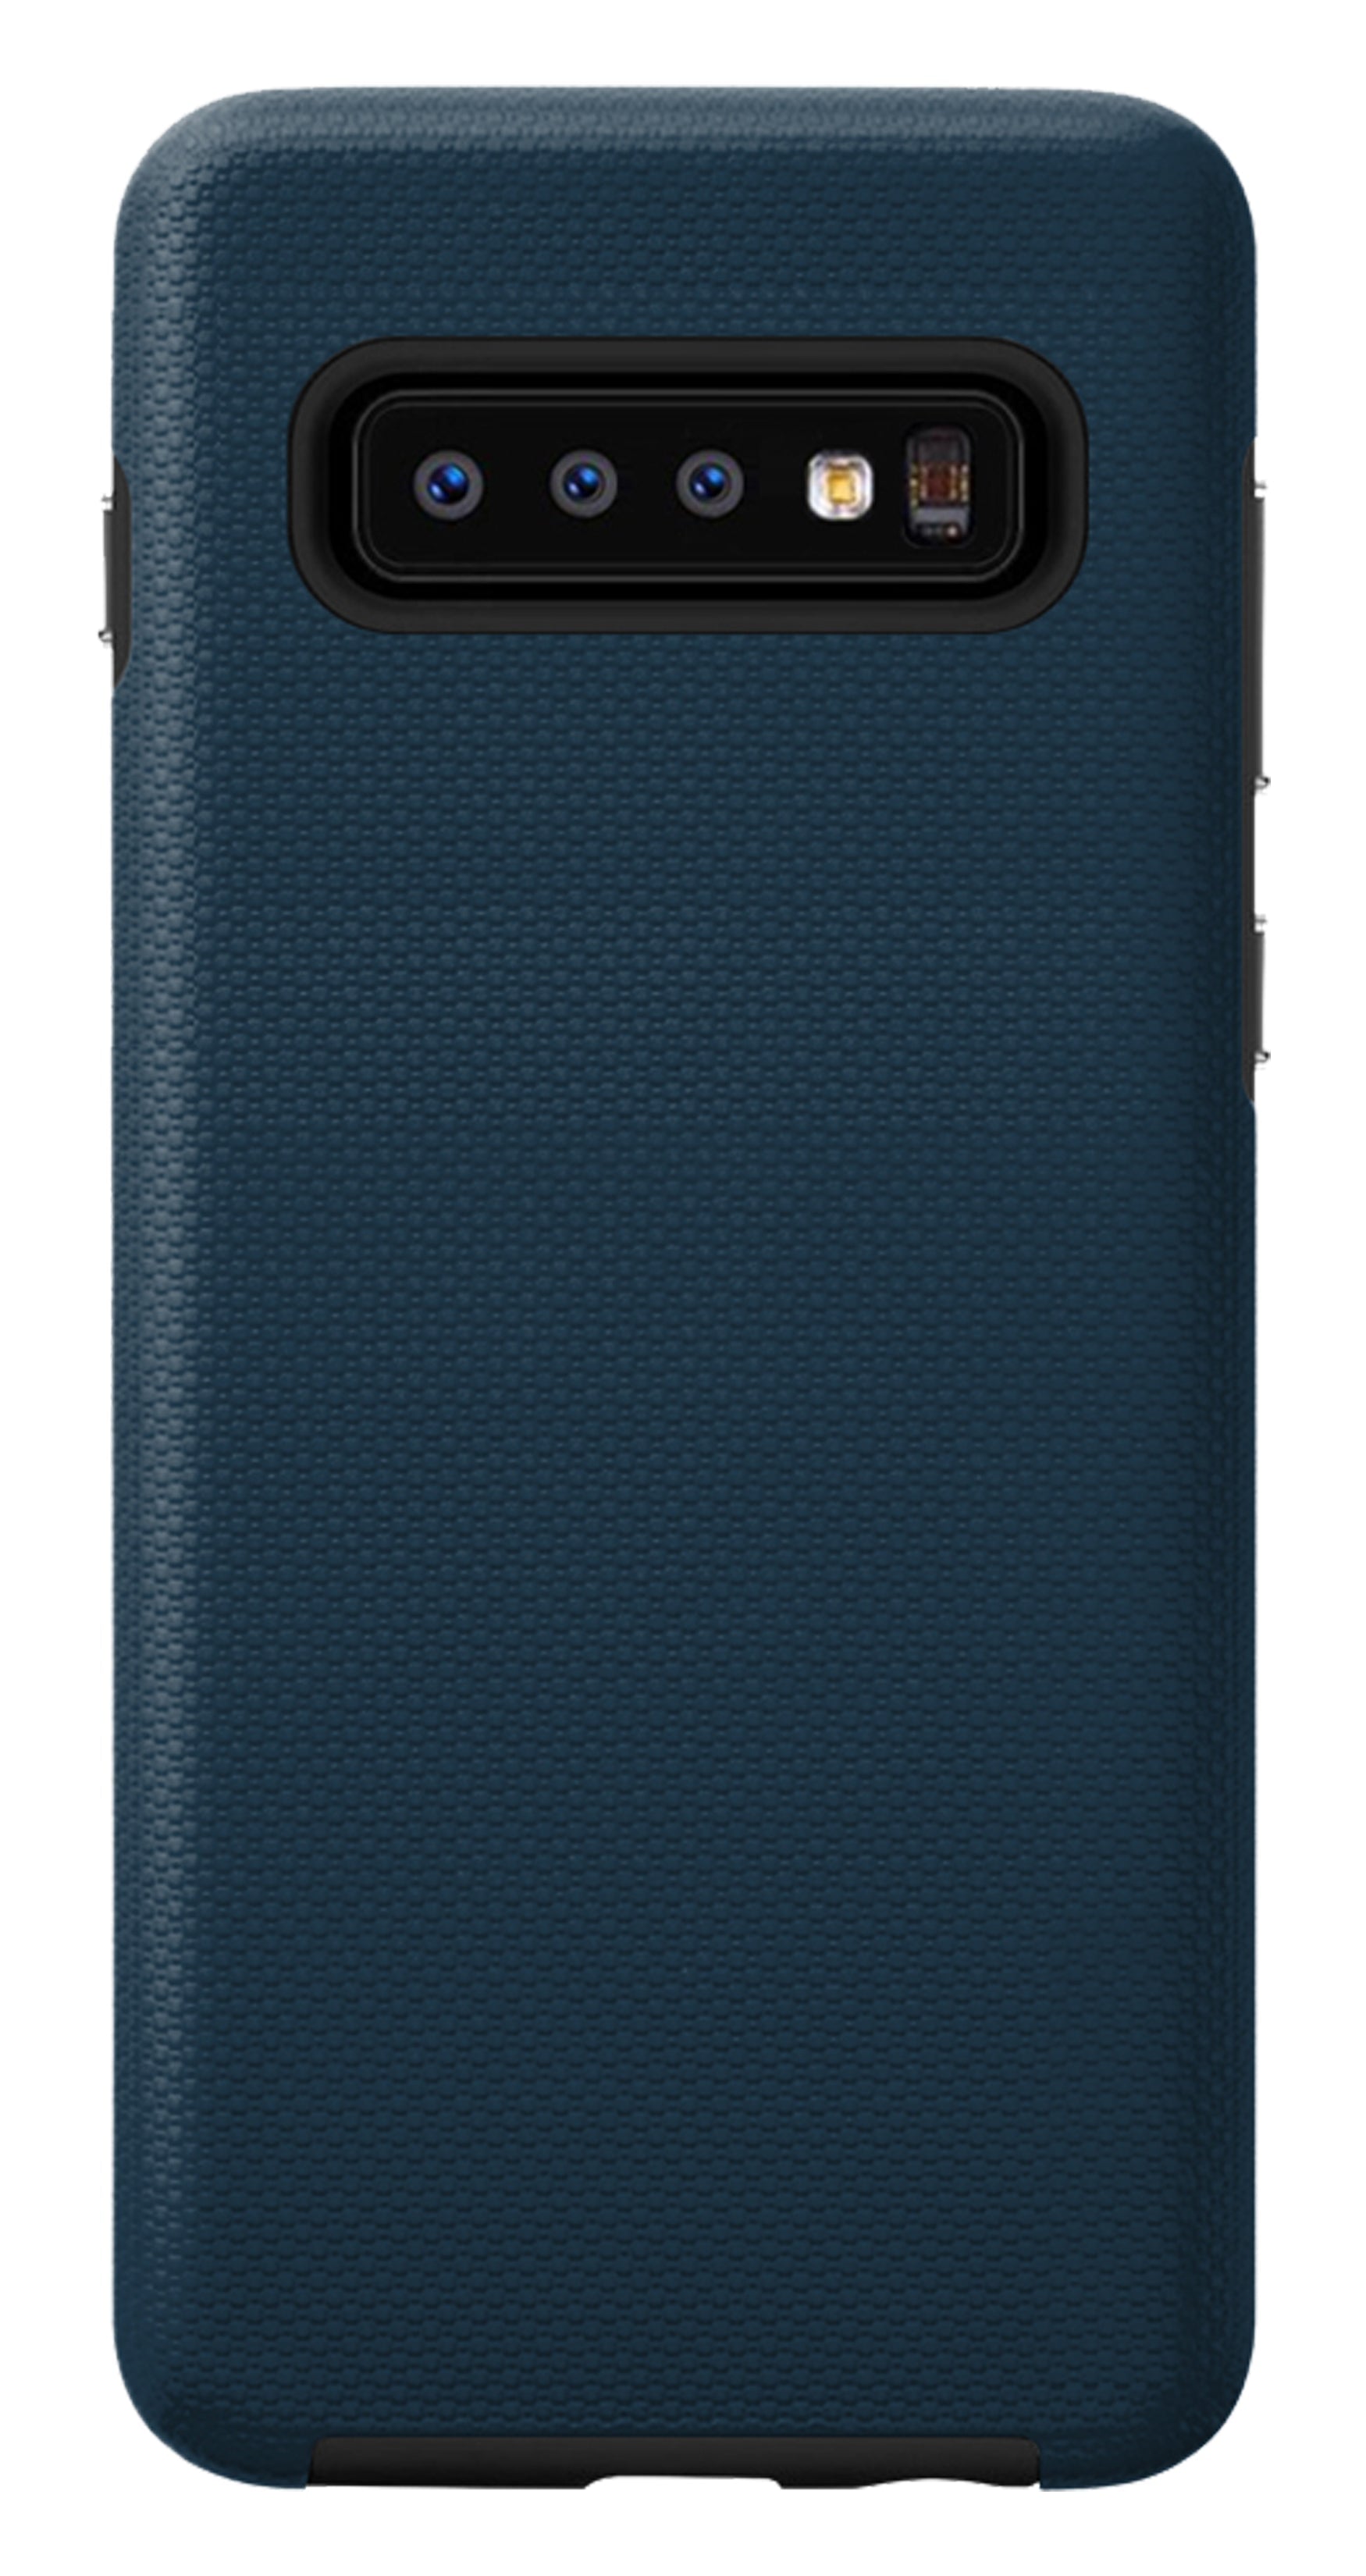 Armour 2X Case Navy Blue for Samsung Galaxy S10+